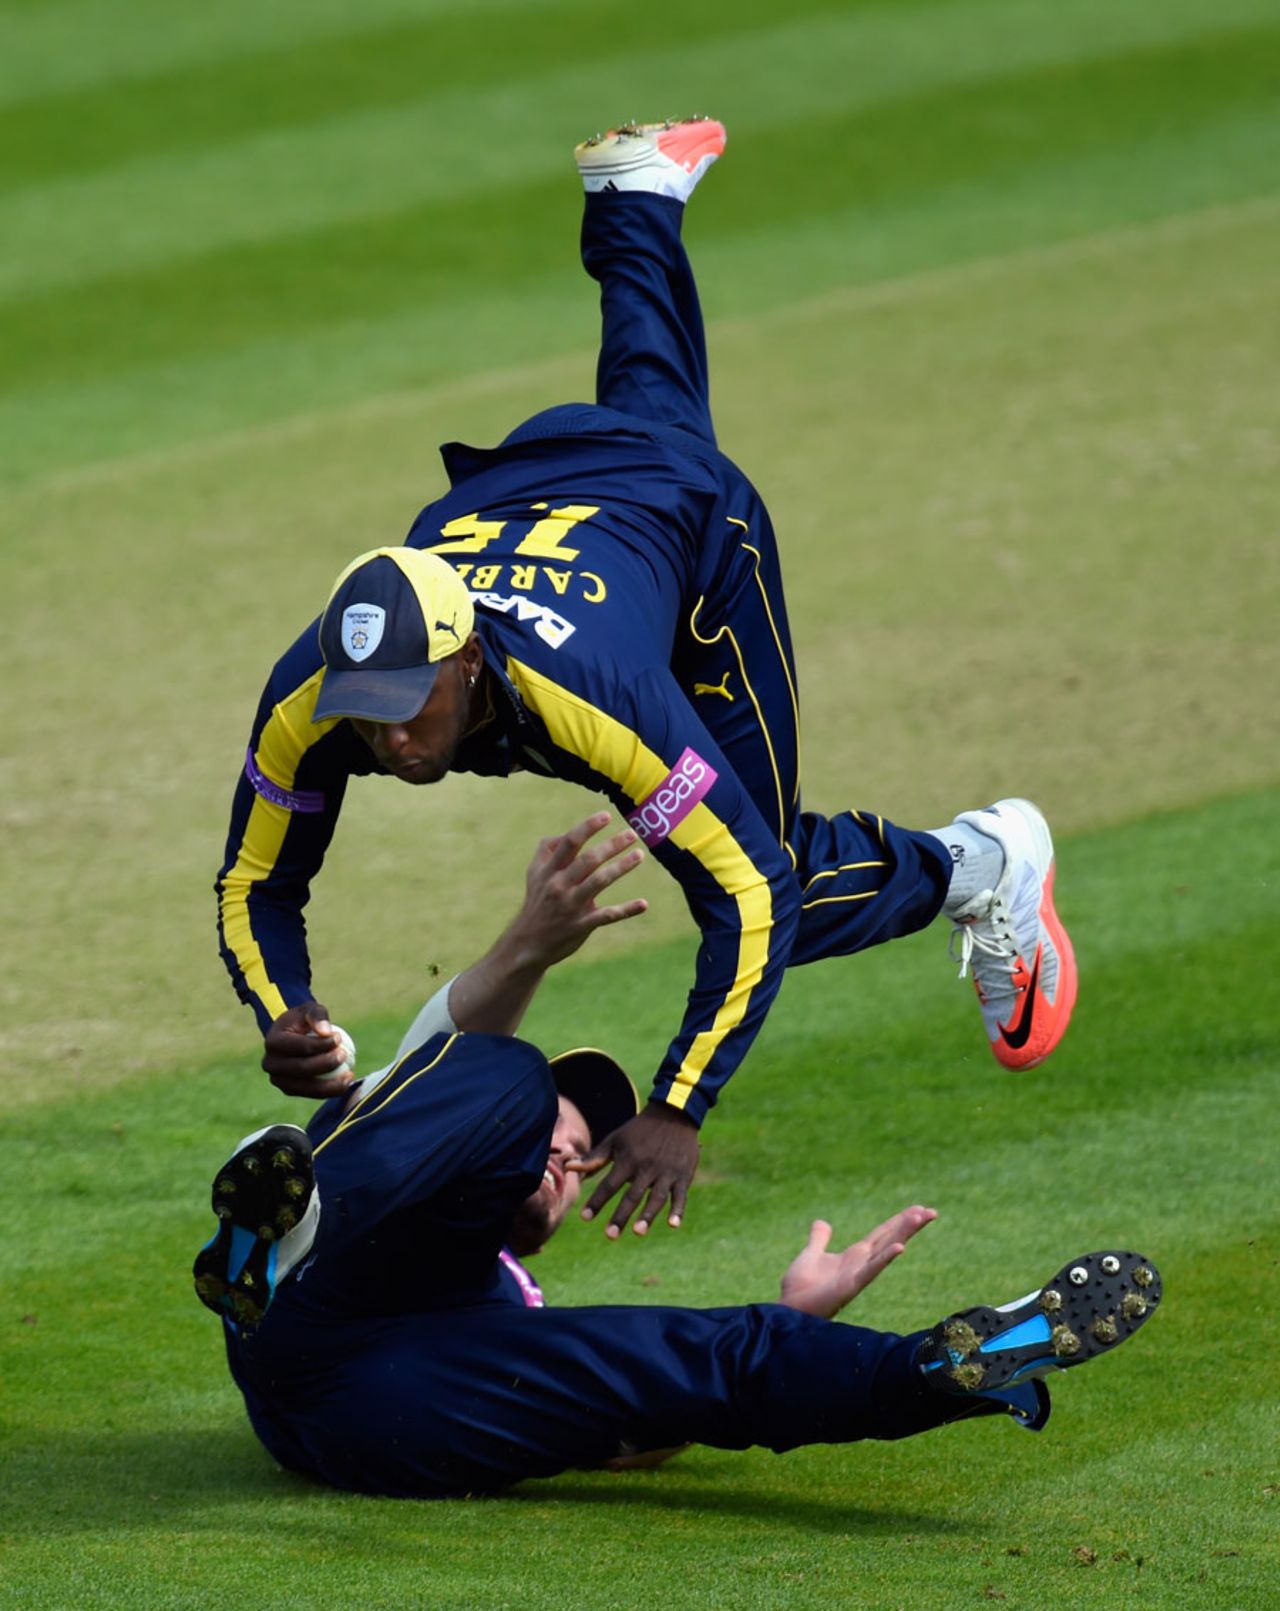 Michael Carberry held on to a catch despite colliding with Joe Gatting, Glamorgan v Hampshire, Royal London Cup, Group B, Cardiff, August 2, 2015